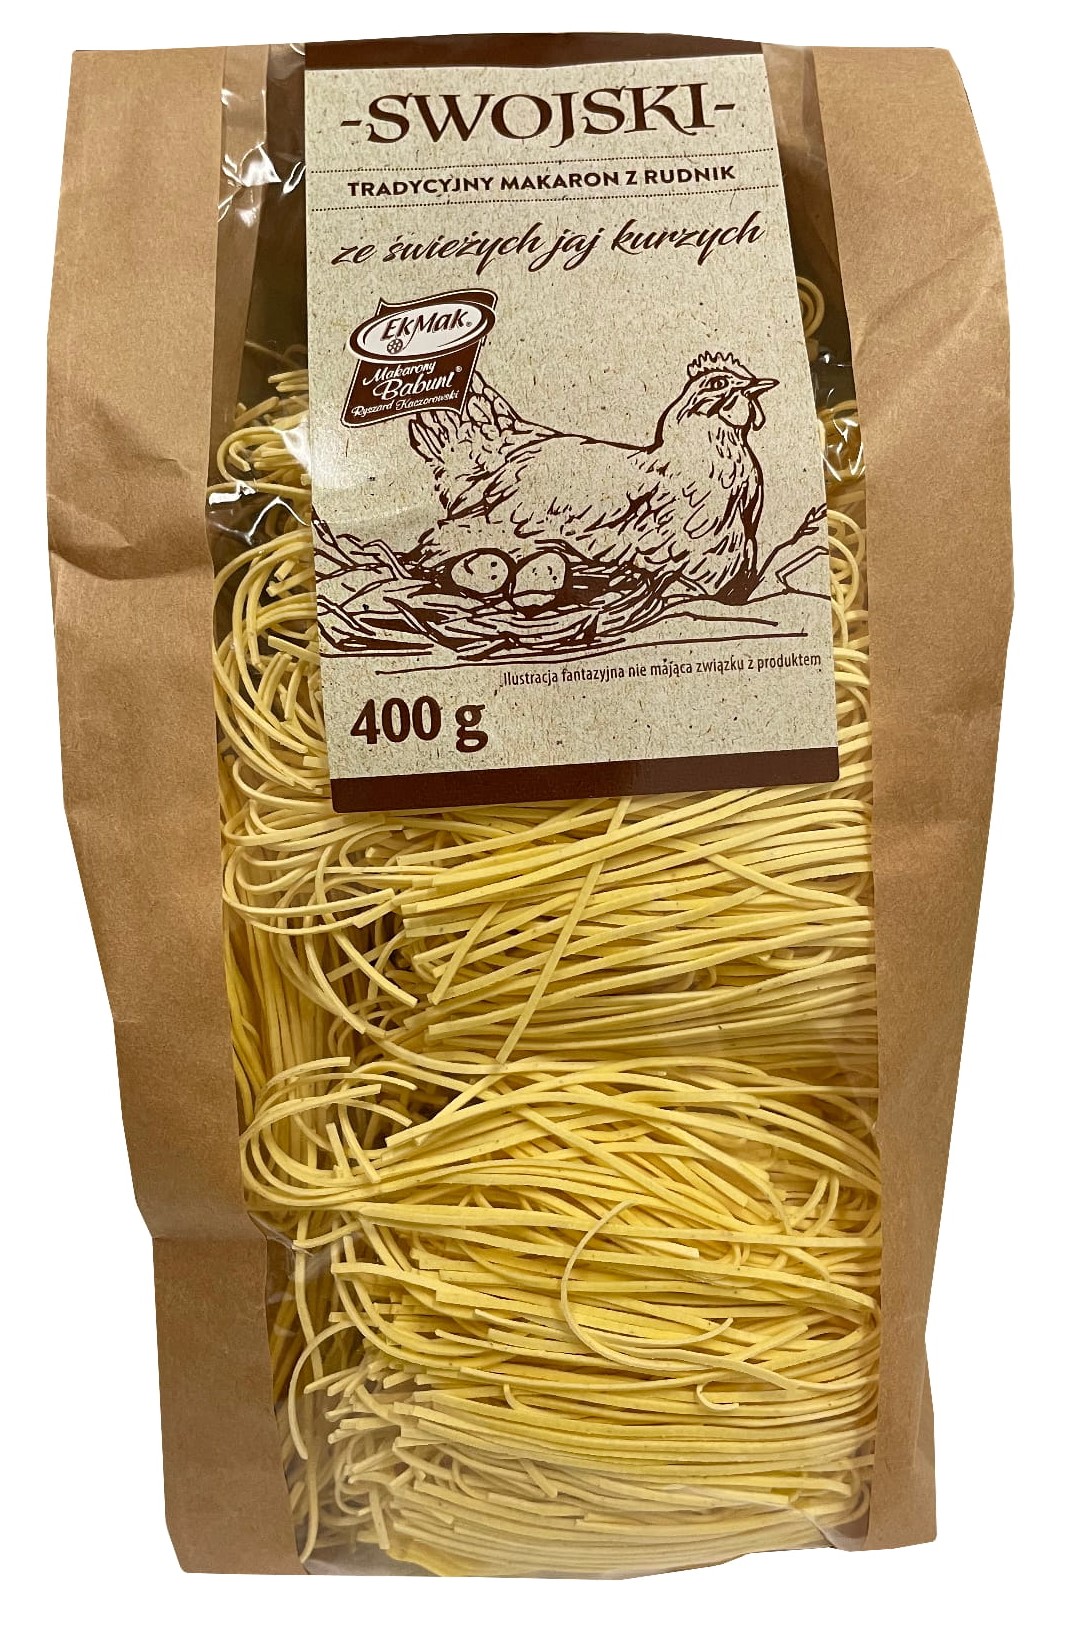 EkMak is a homely traditional sliced pasta